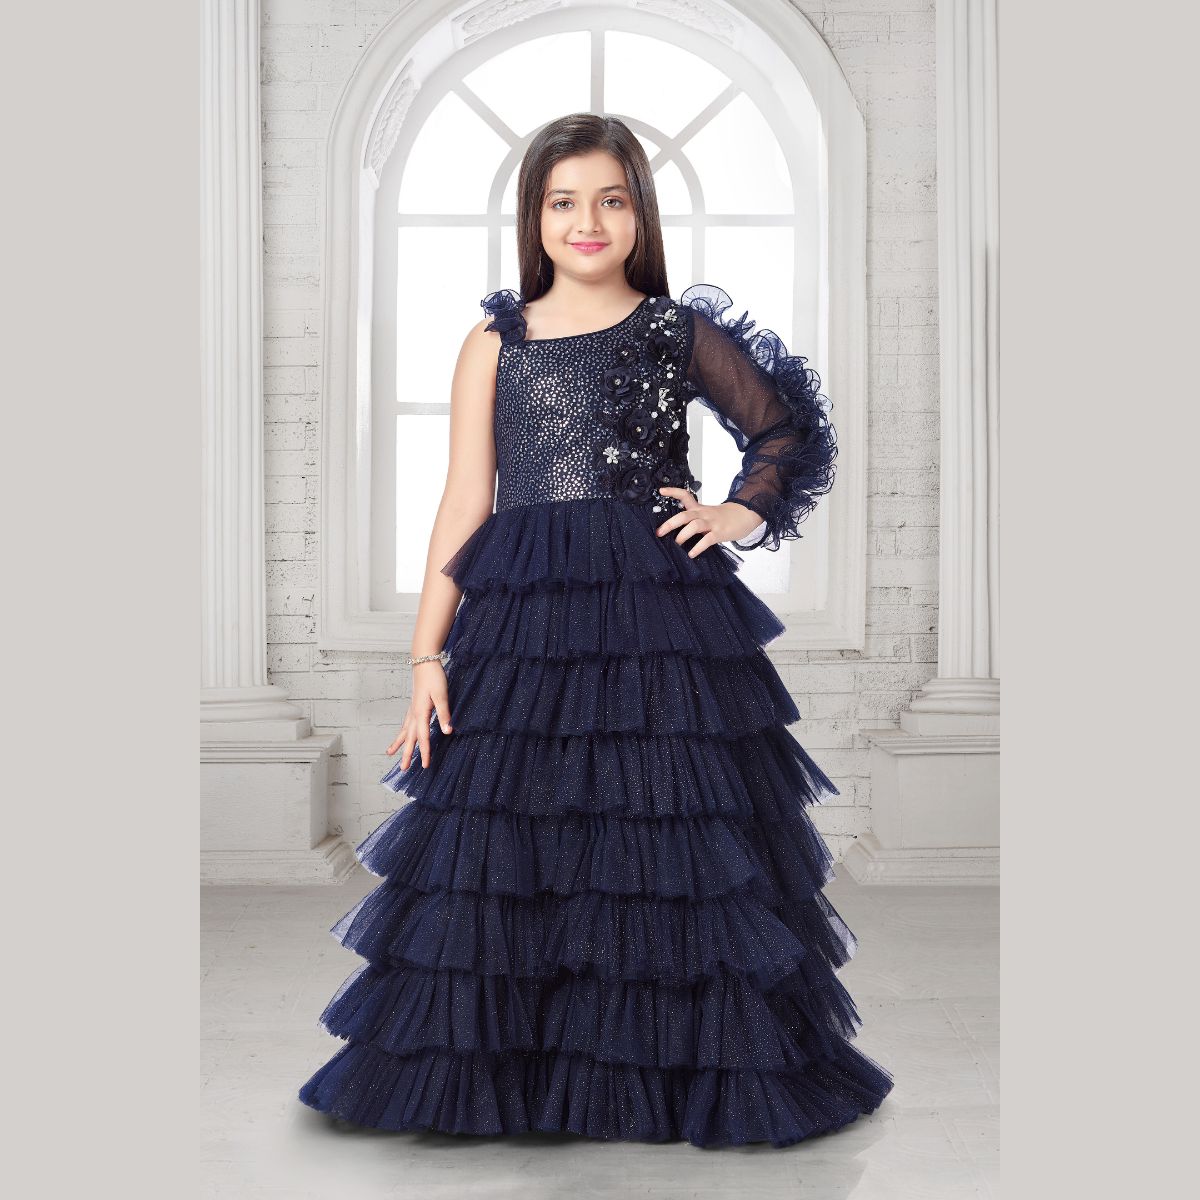 Gown : Navy blue tapeta silk embroidered partywear gown